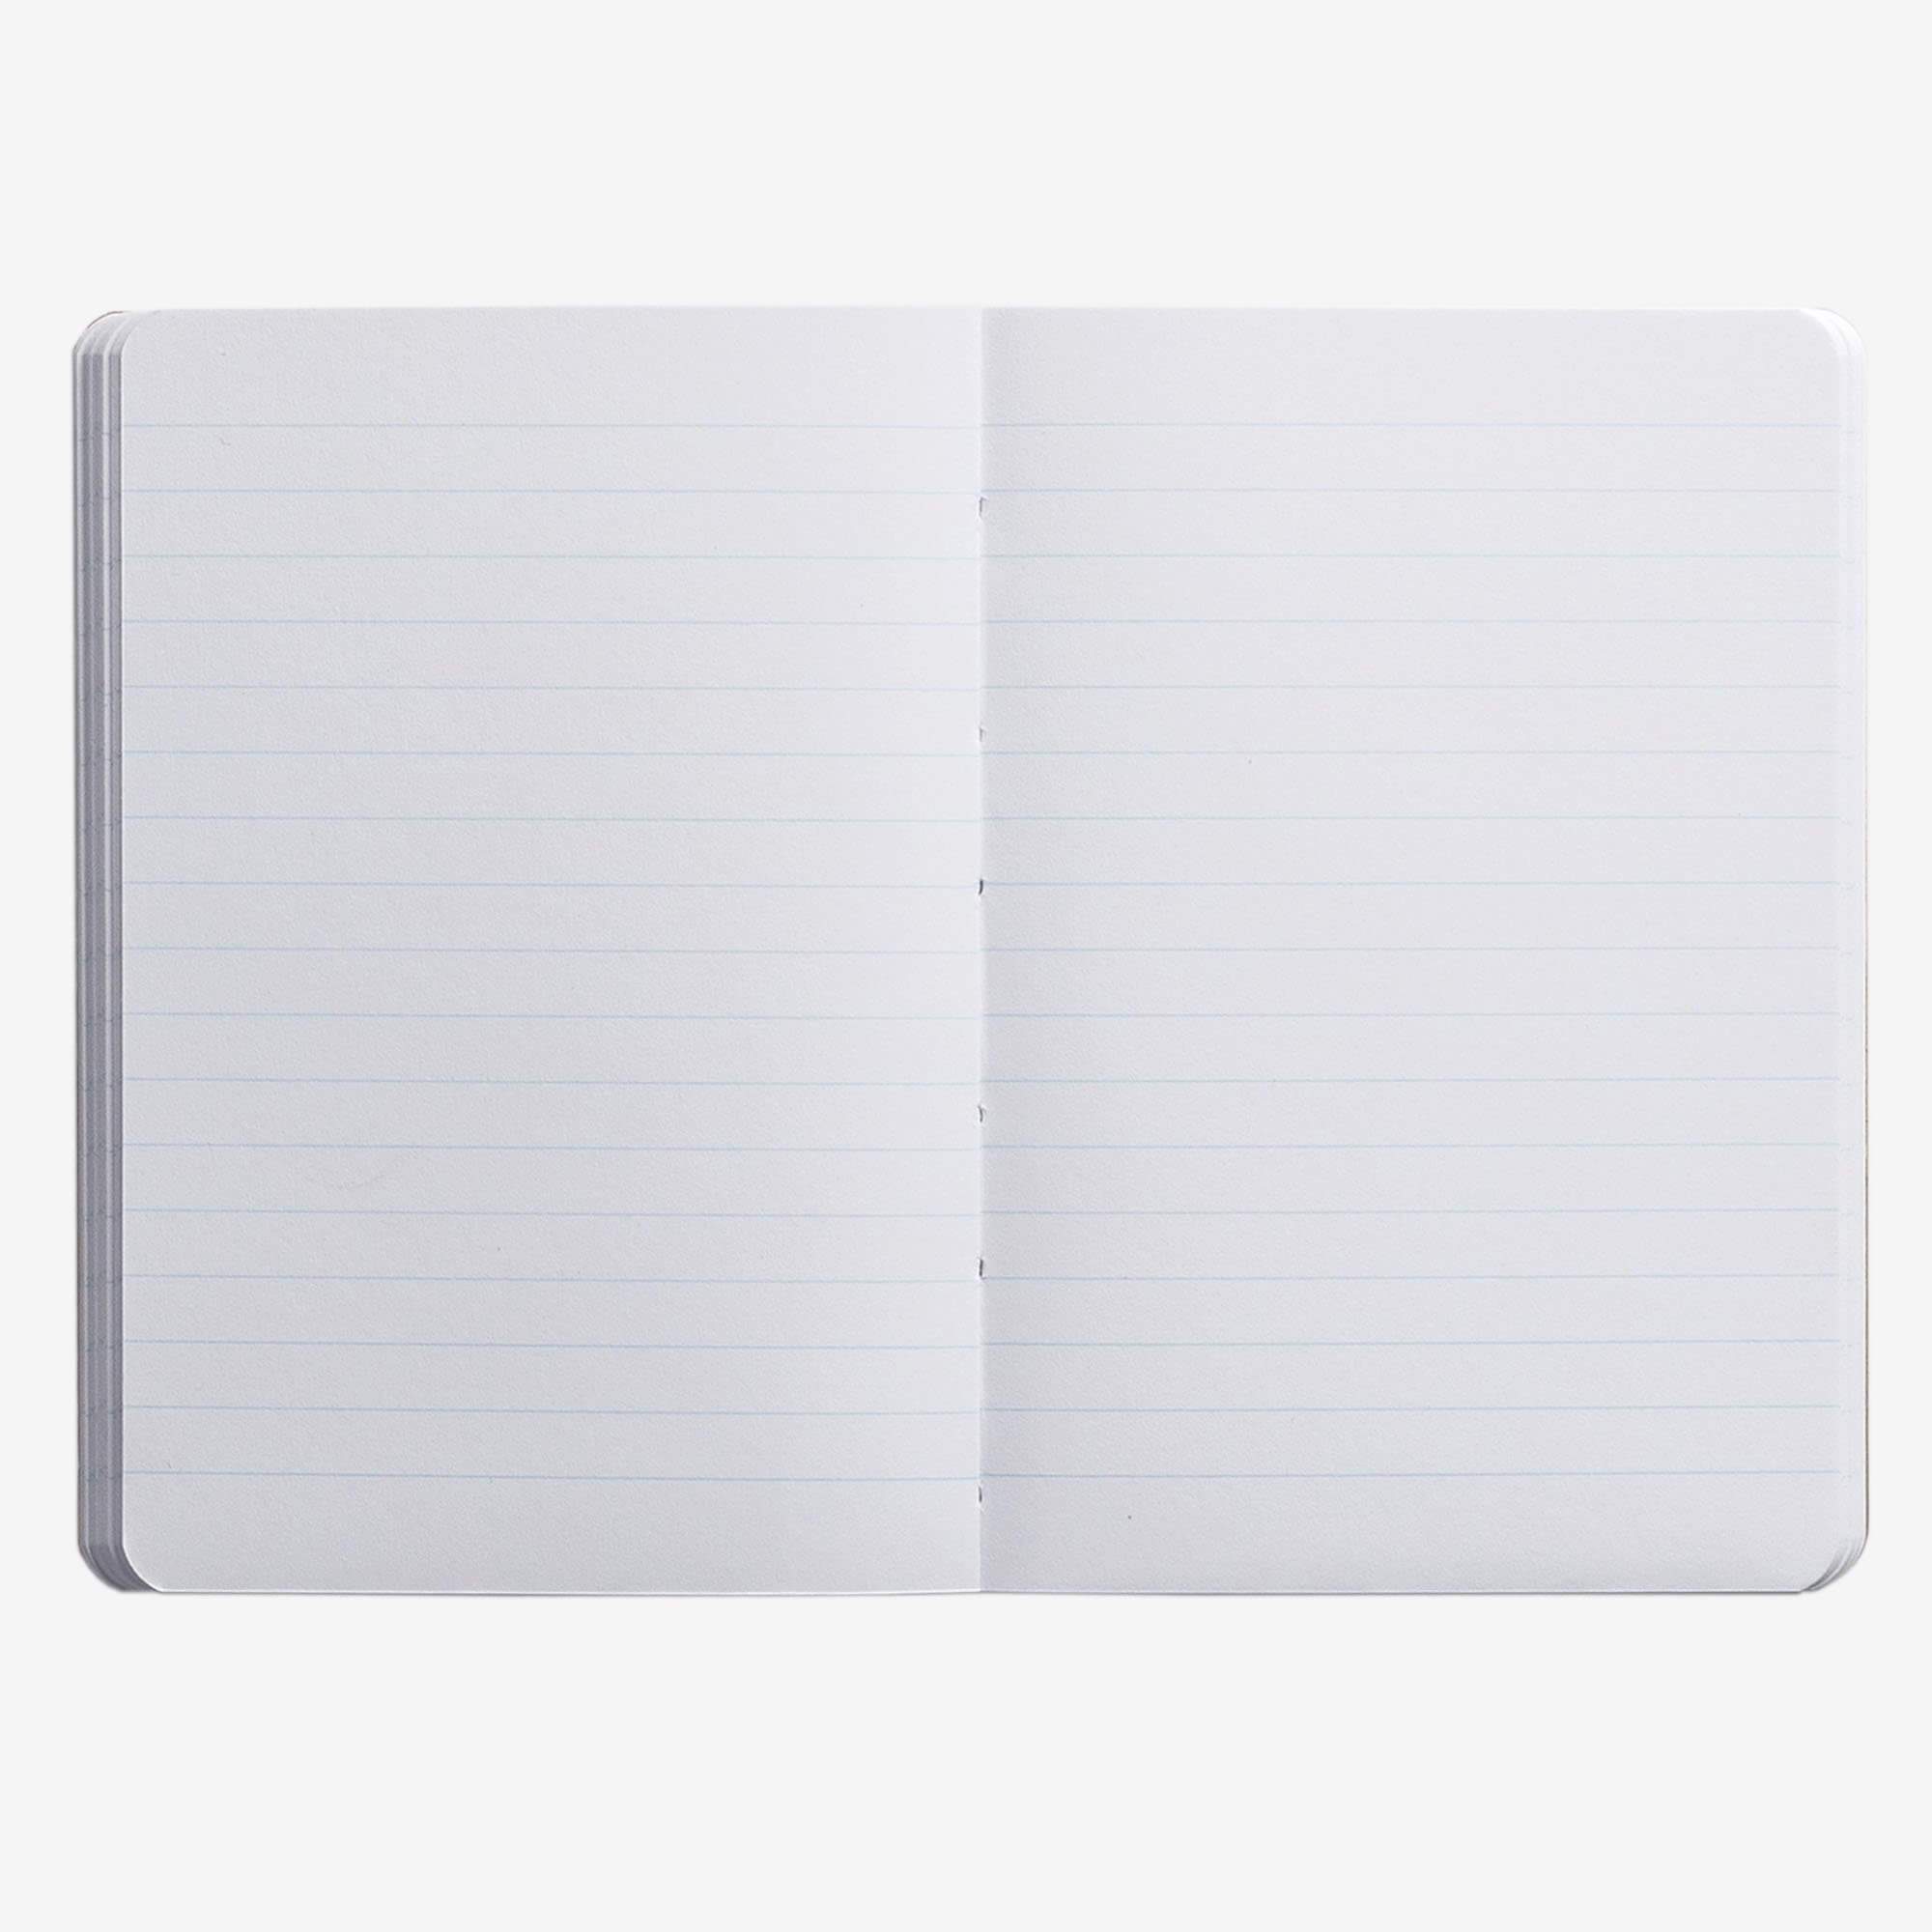 Notebook S Be wise - Carnet 168 pages Legami 